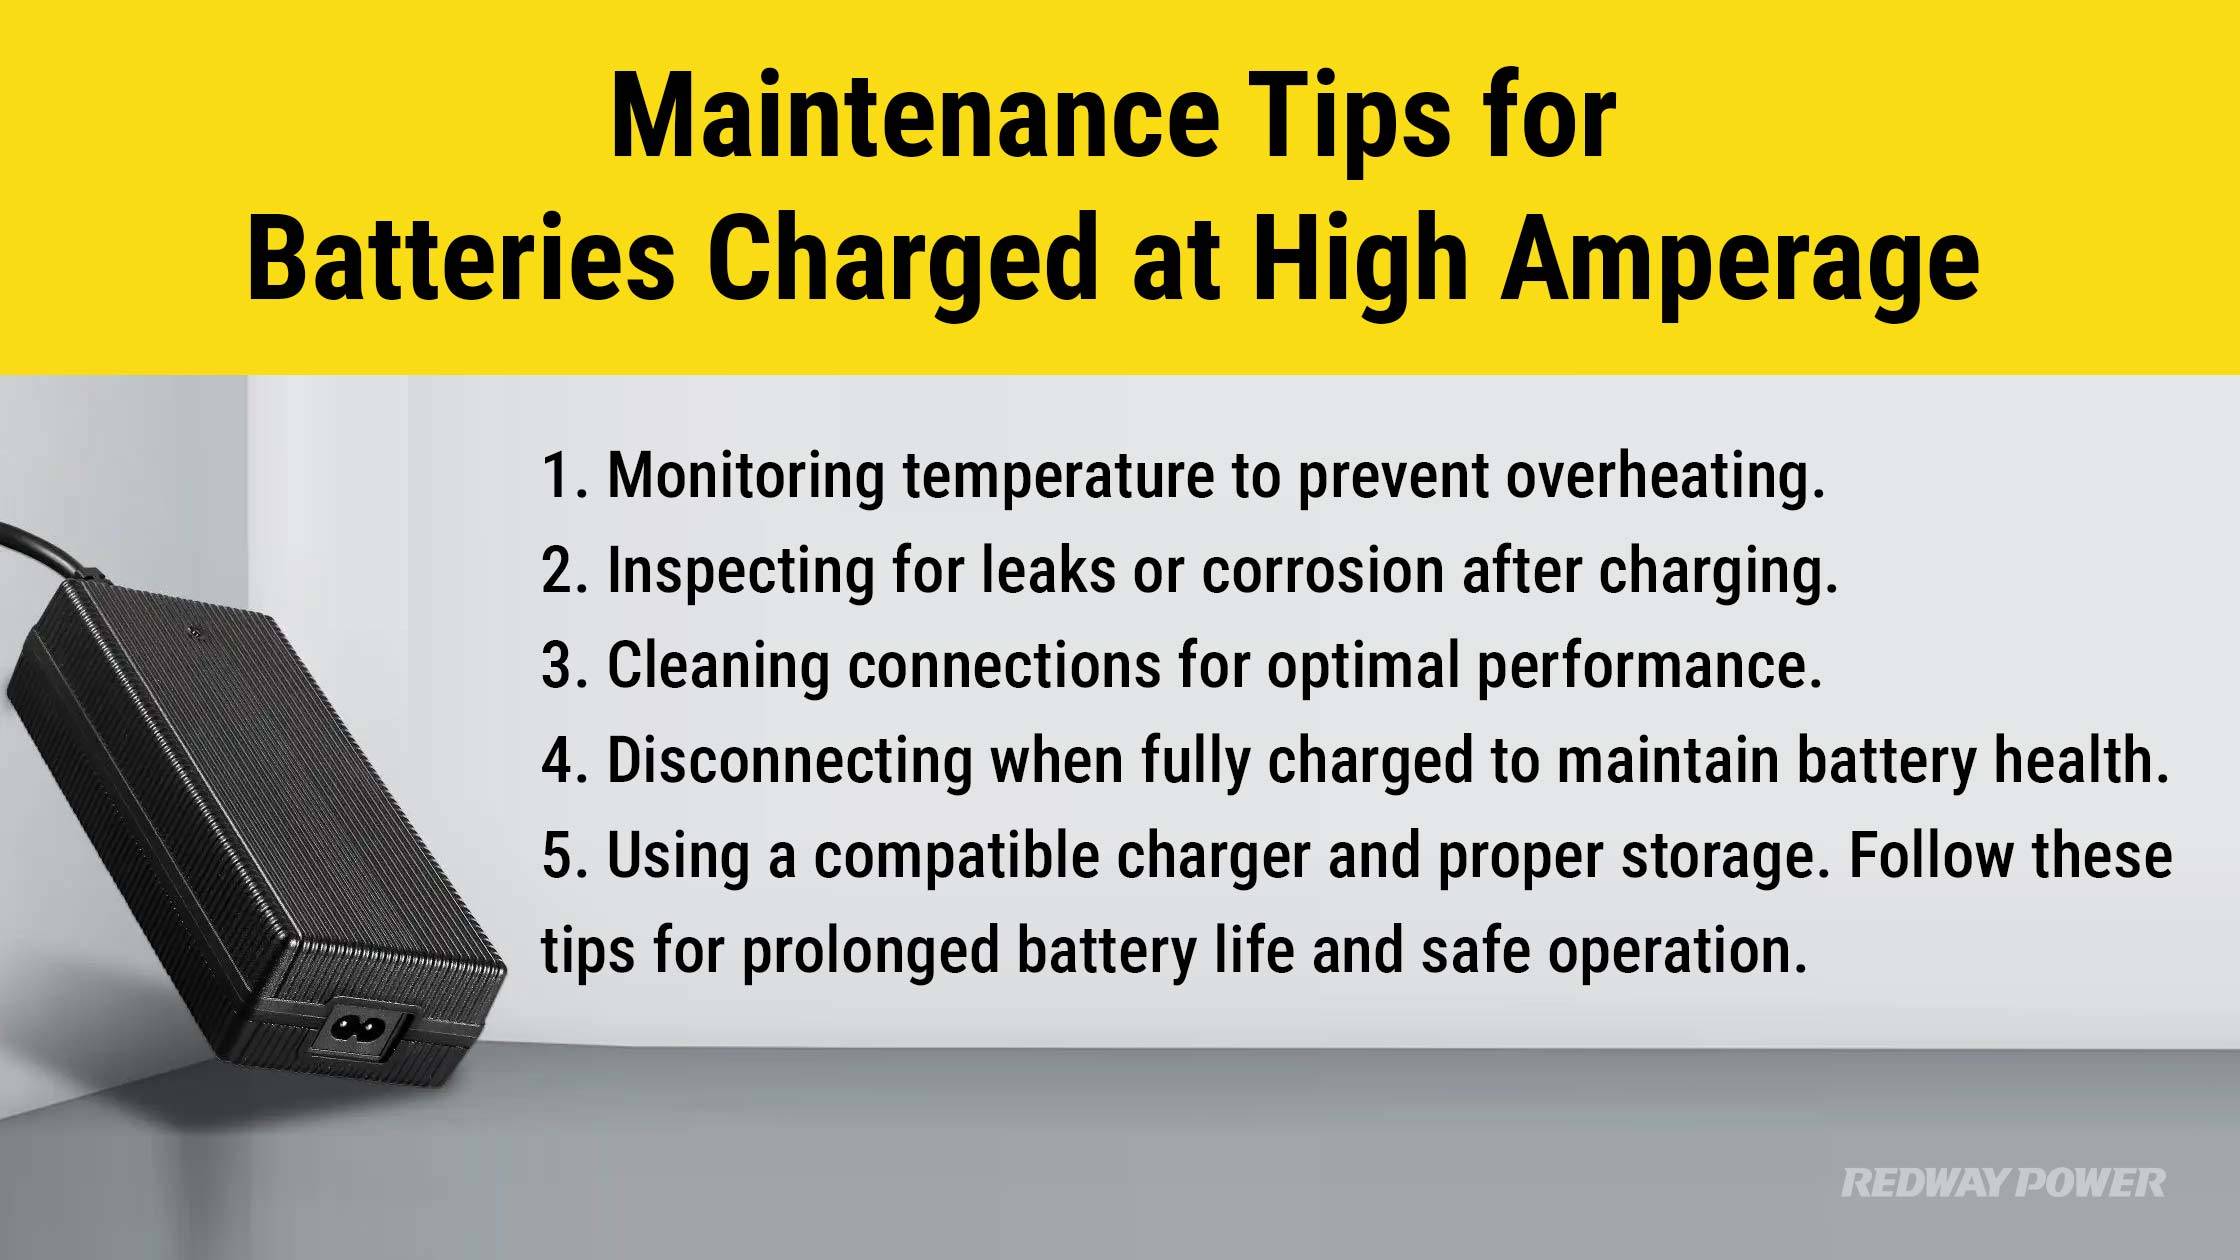 Maintenance Tips for Batteries Charged at High Amperage. Can I Charge My Battery At 20 Amps? redway lifepo4 battery 20A charger